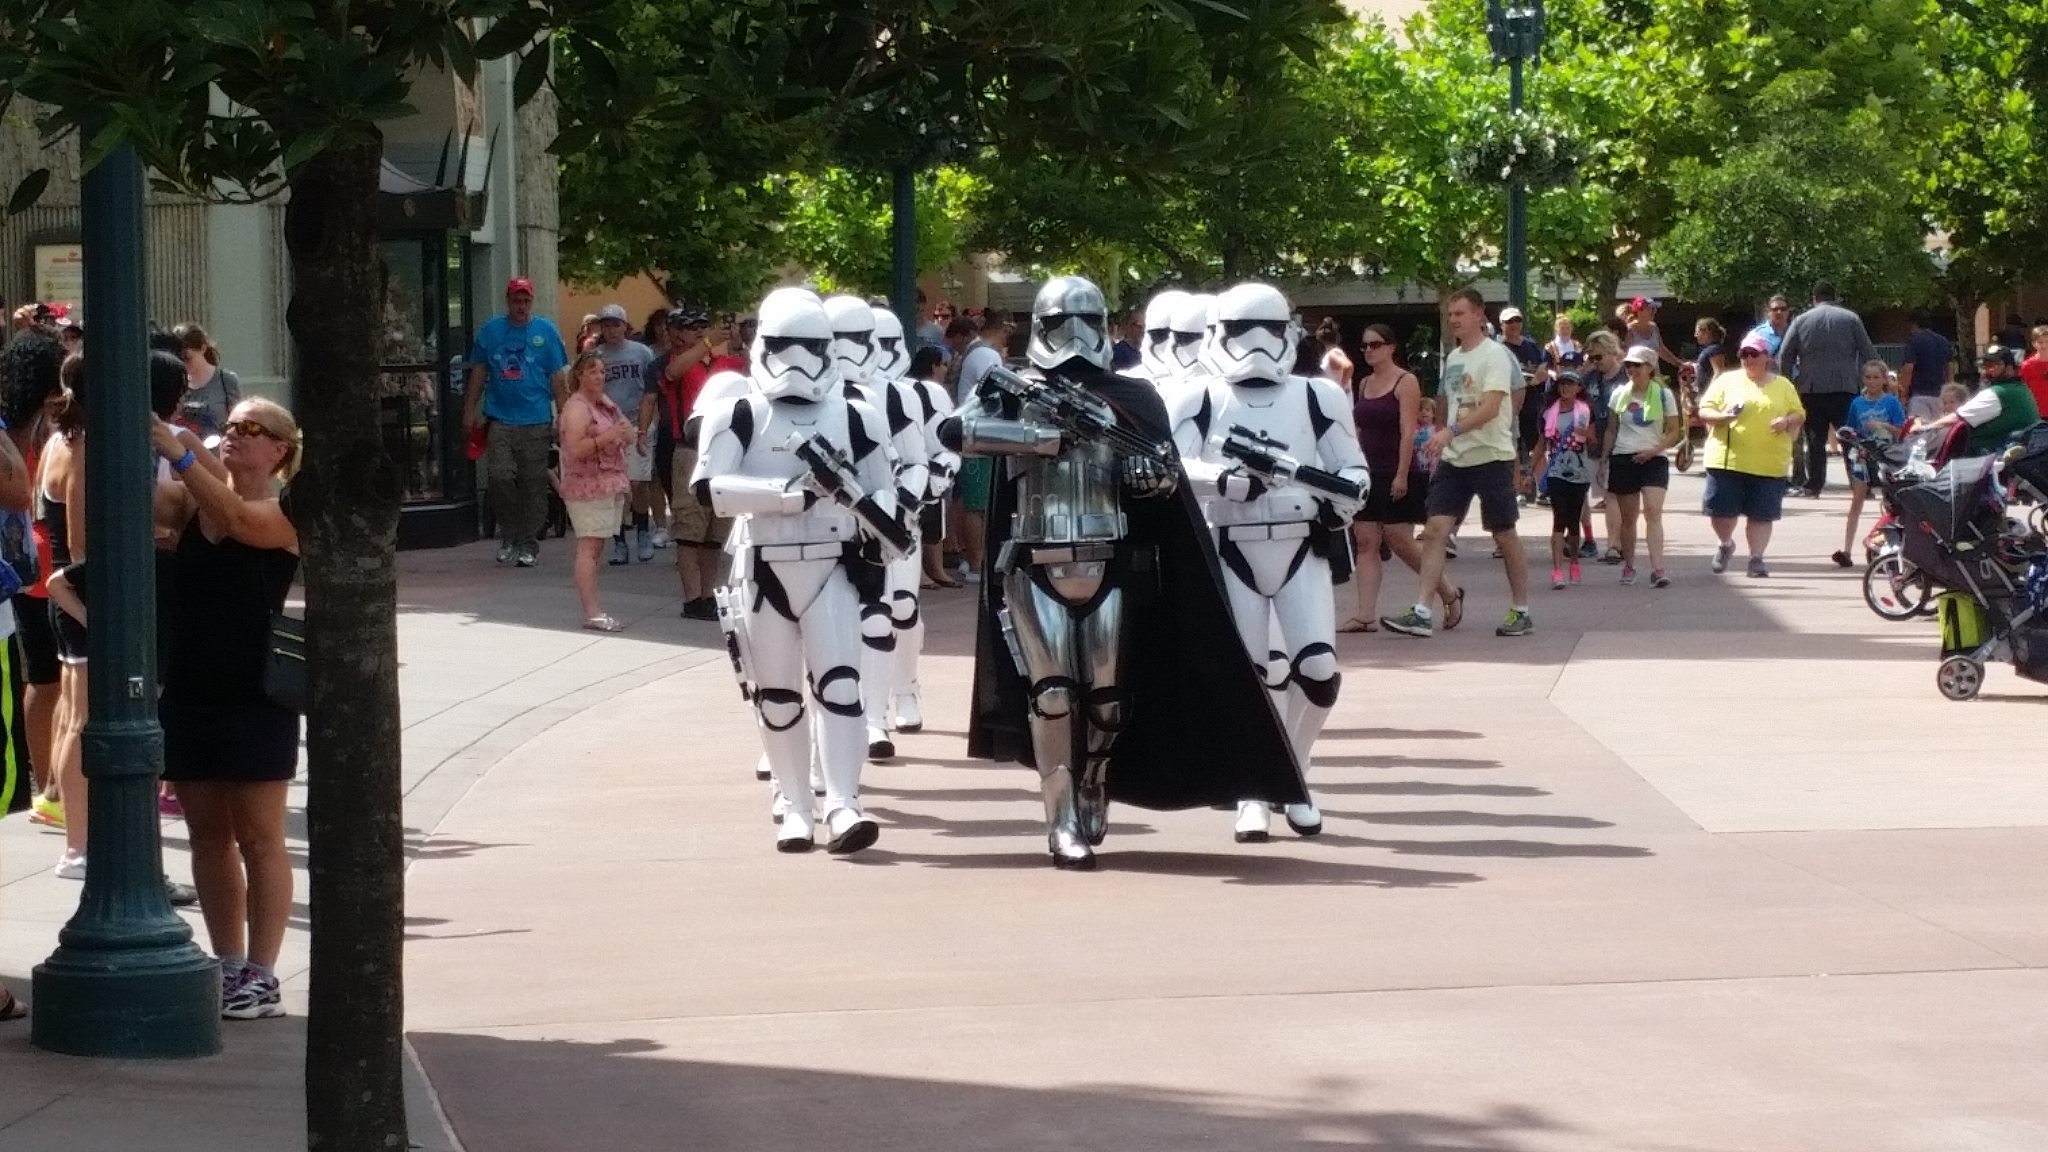 Captain Phasma and the First Order Troopers